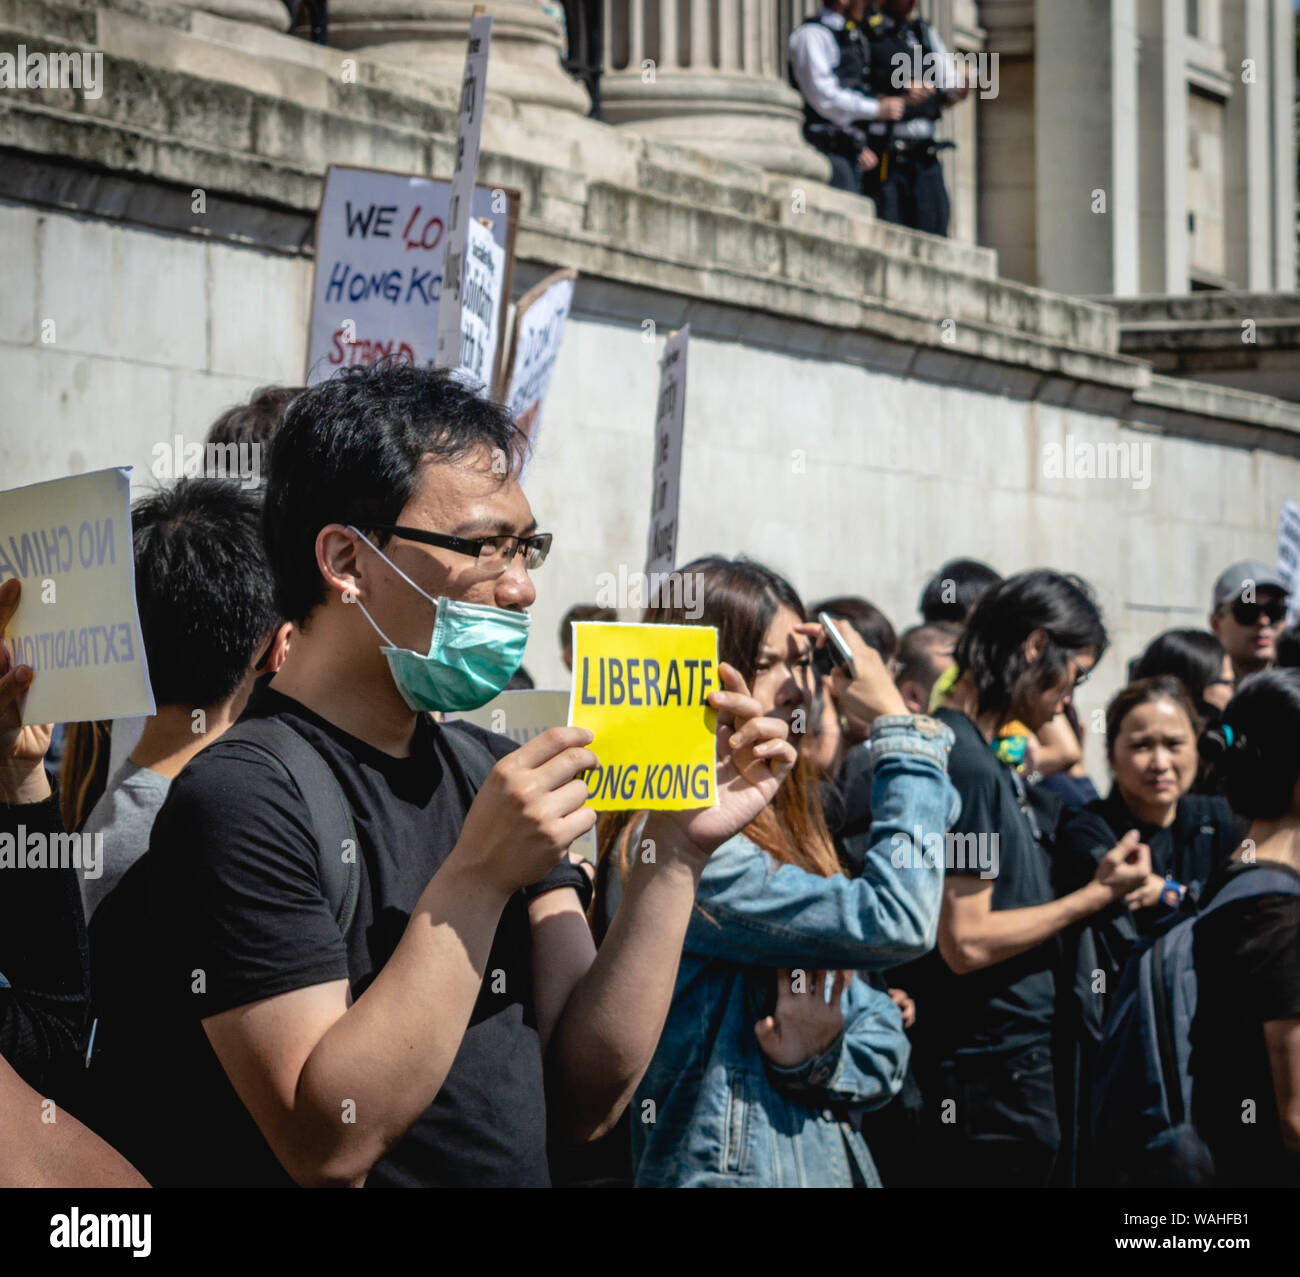 London, United Kingdom - August 17,  2019: Supporter of the UK Solidarity with Hong Kong rally holding a small banner saying 'Liberate Hong Kong.' Stock Photo